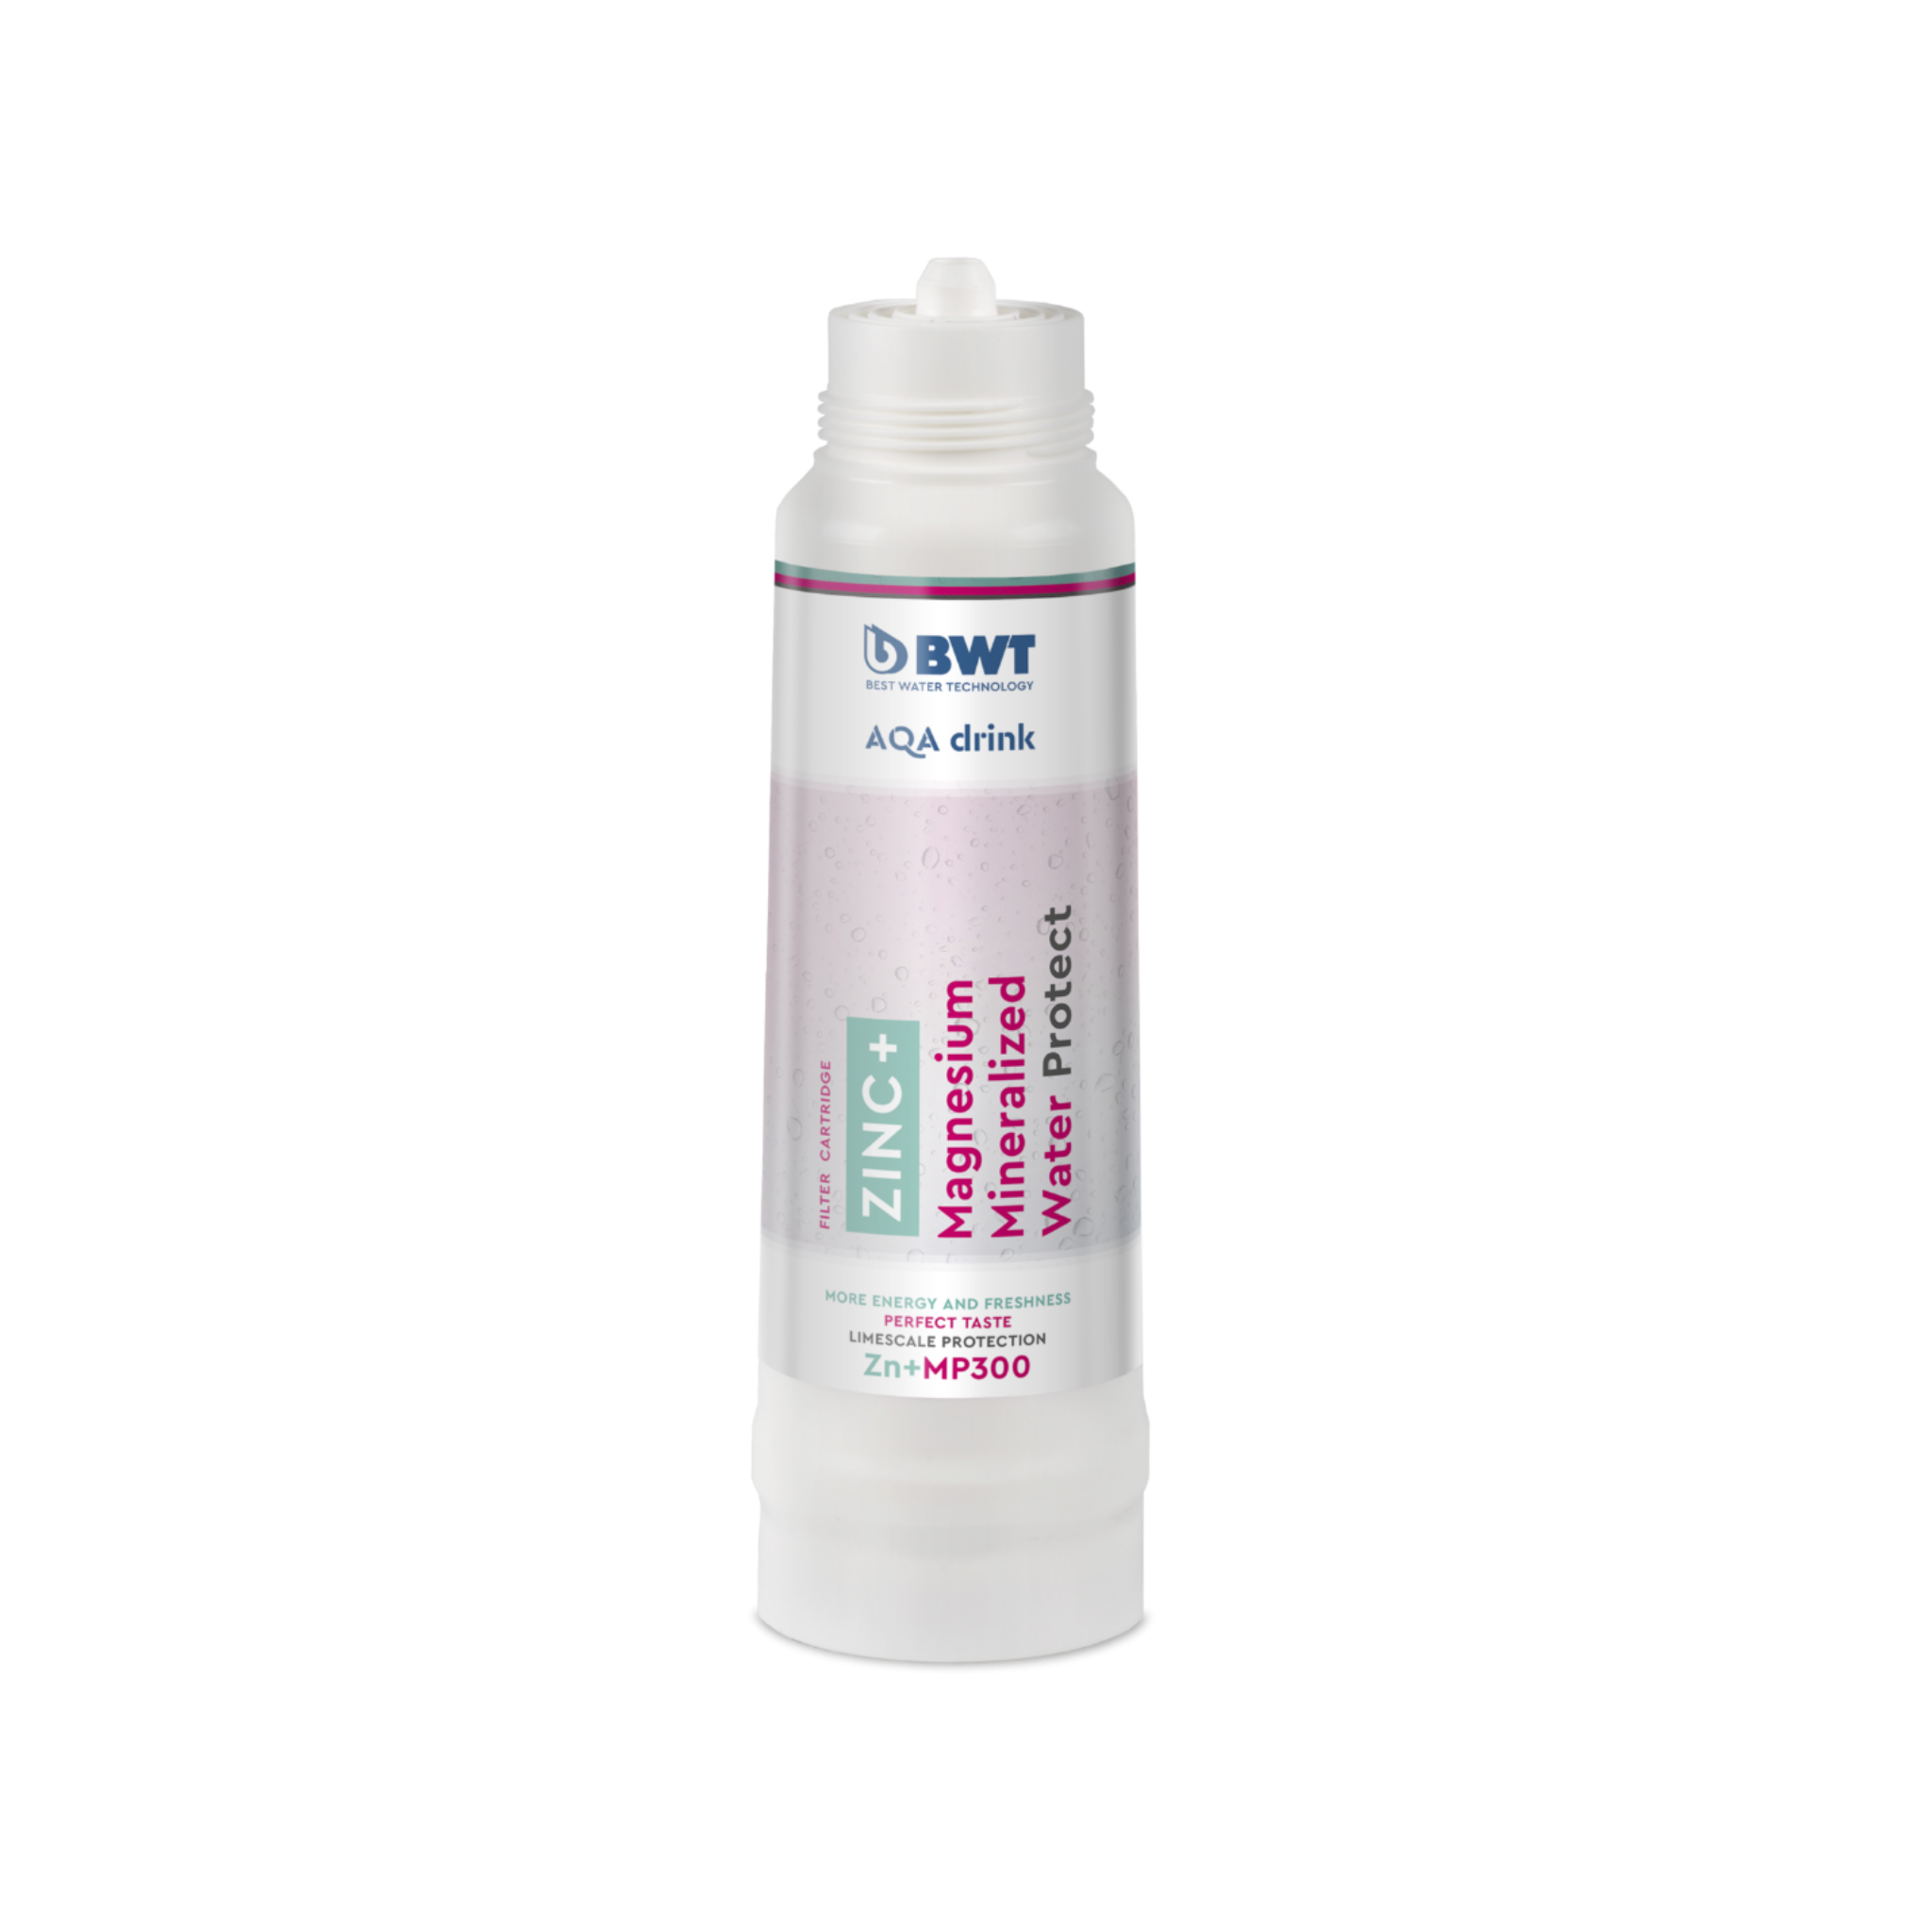 BWT AQA drink ZINC + Magnesium Mineralized Water Protect (Zn+MP)